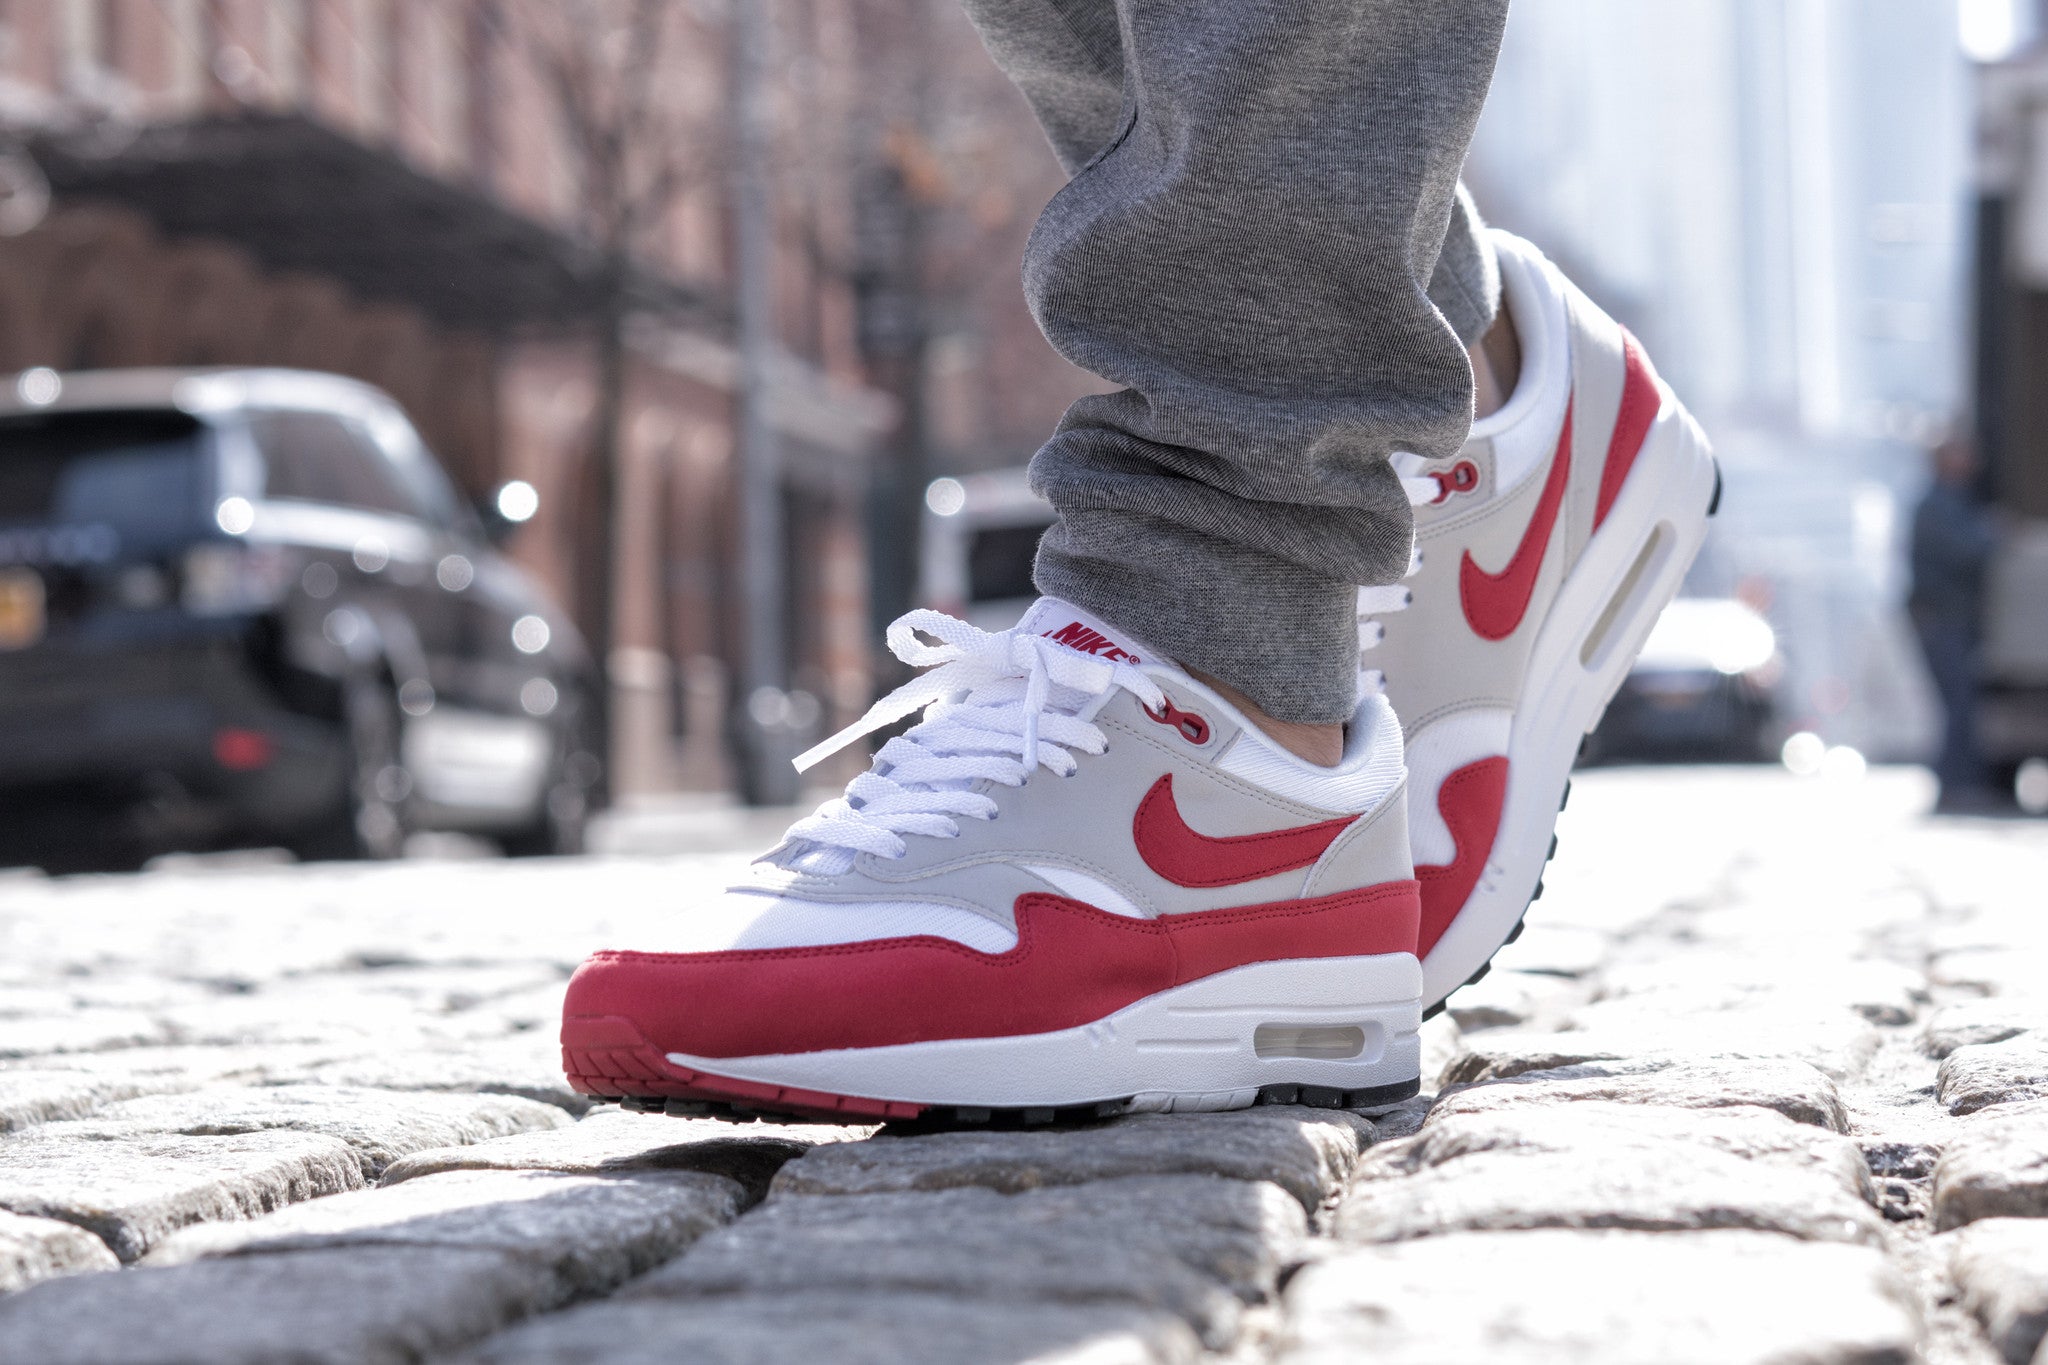 Nike Air Max 1 OG Sport Red Launch Details! – Concepts